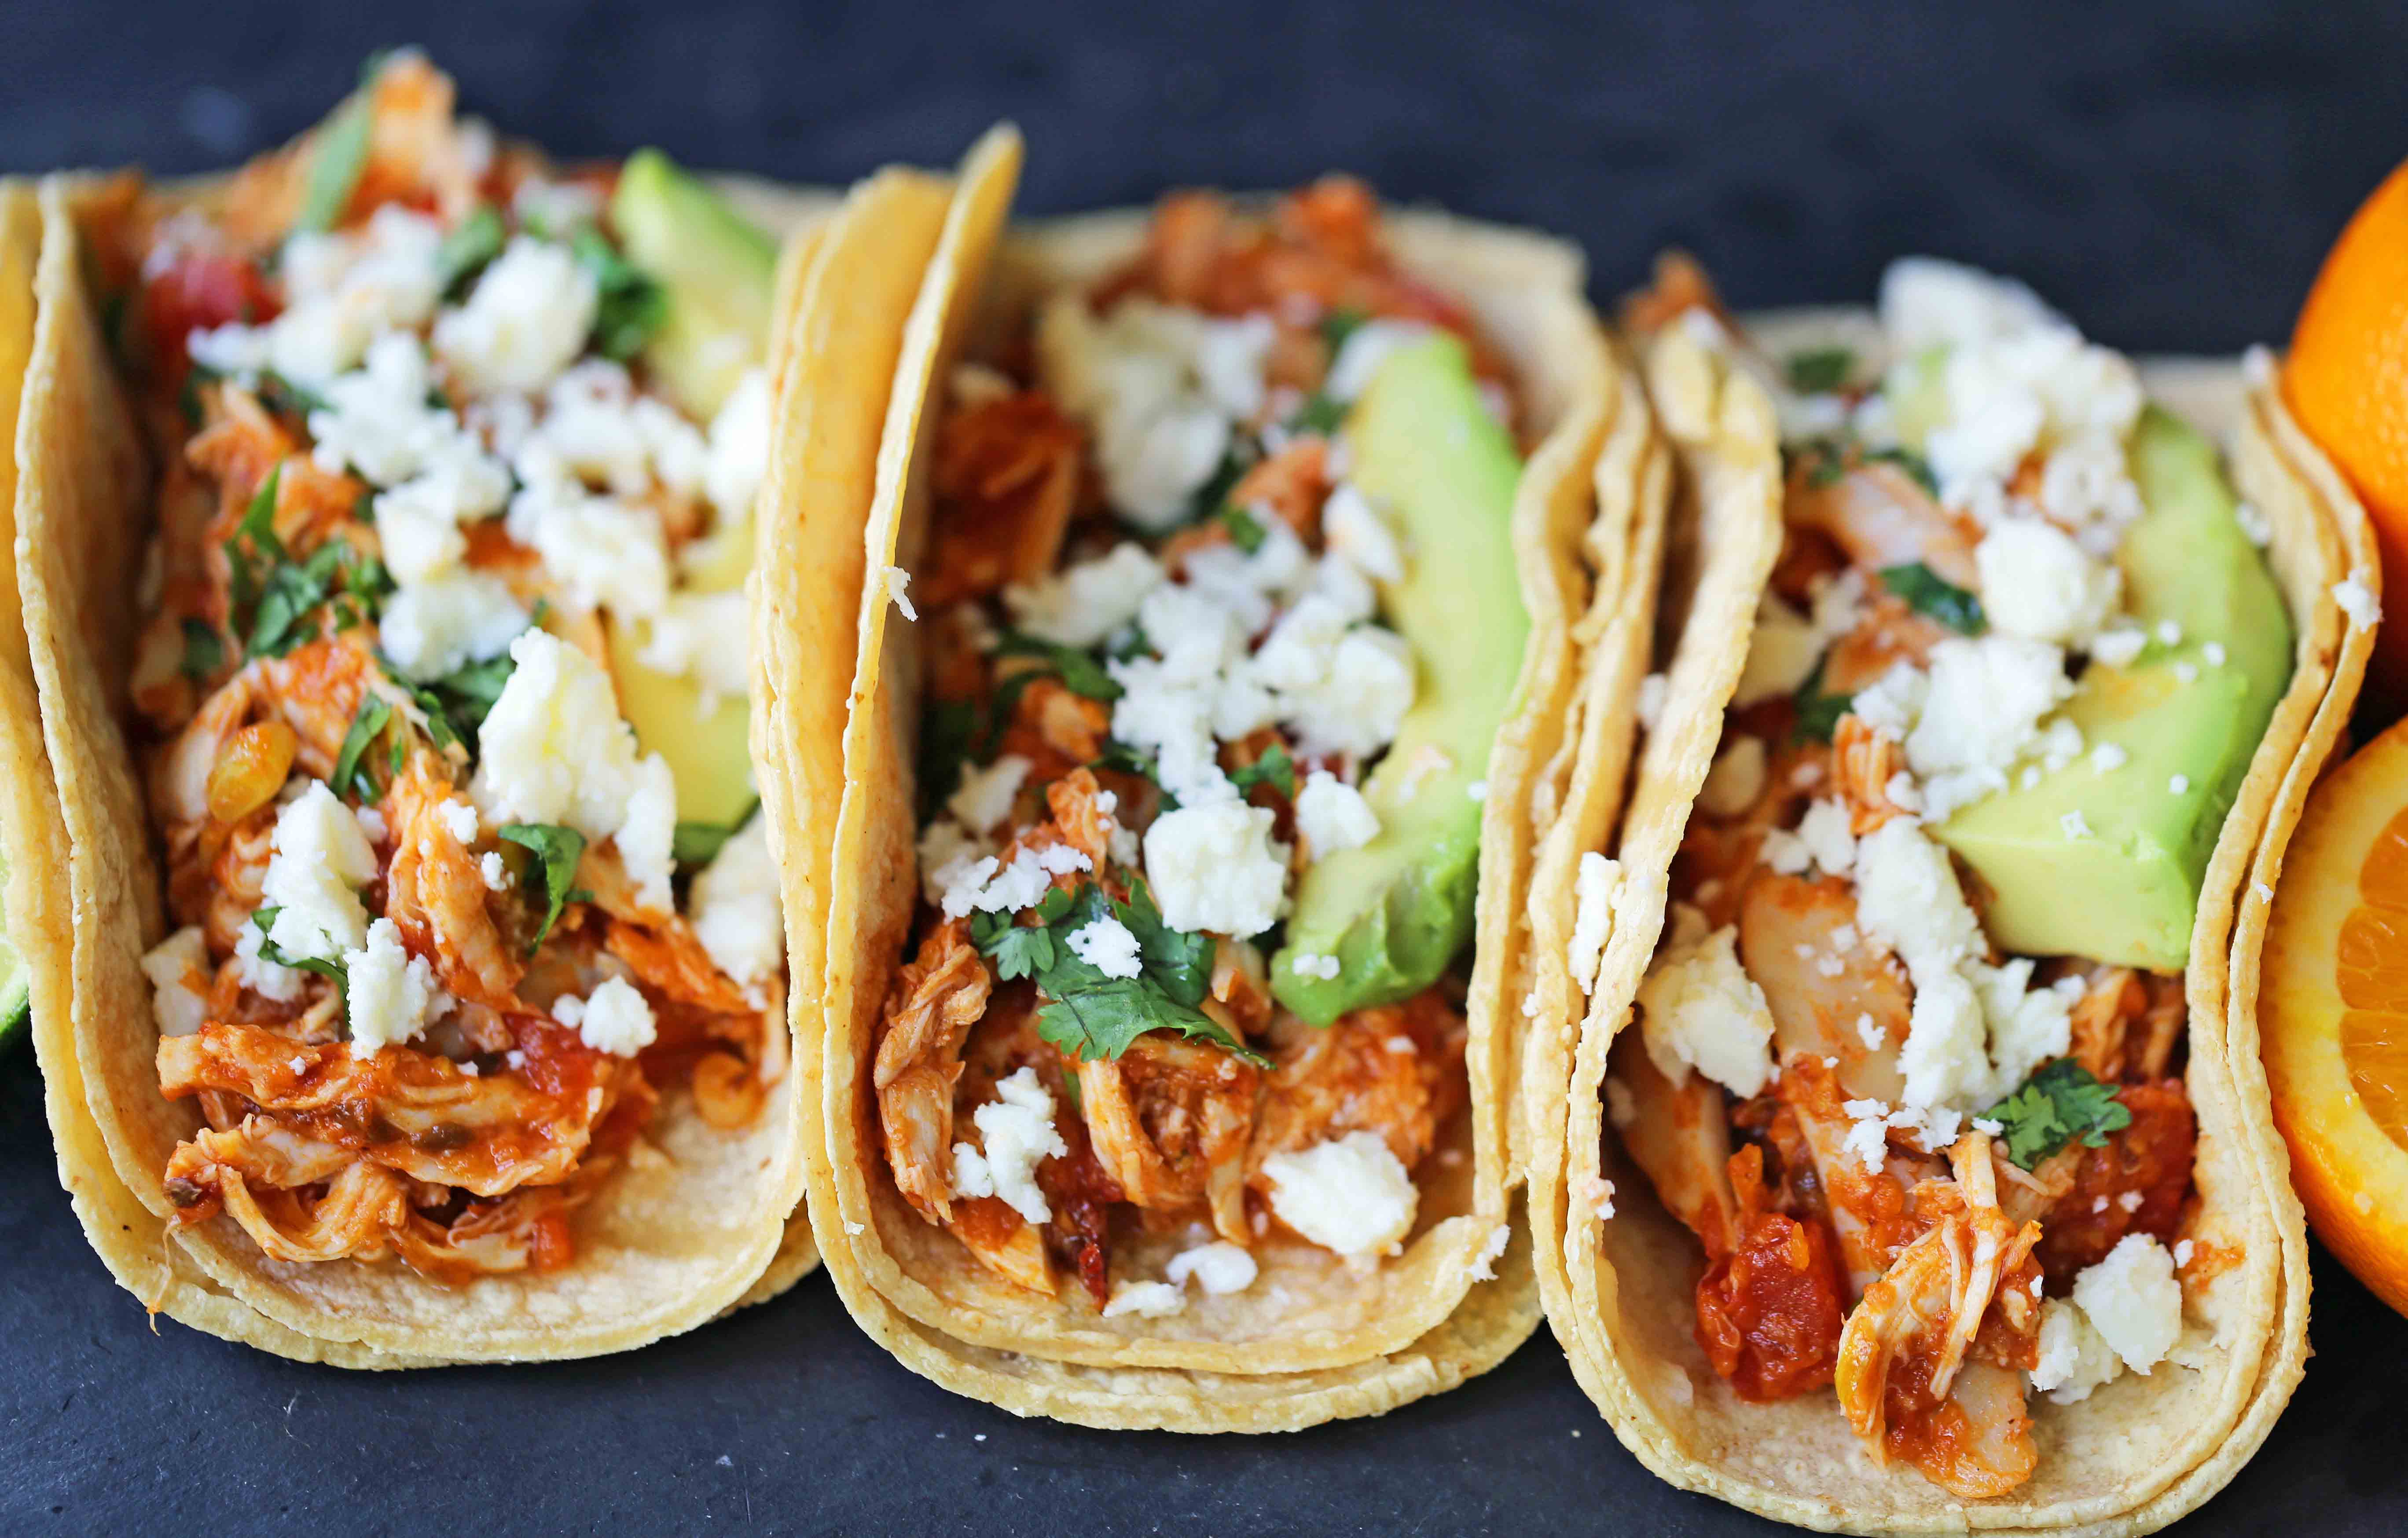 Chipotle Chicken Tinga Tacos. A simple, quick, and easy chicken taco recipe. One skillet chicken taco recipe. www.modernhoney.com #chickentinga #chipotlechicken #chickentacos #chickentingatacos 